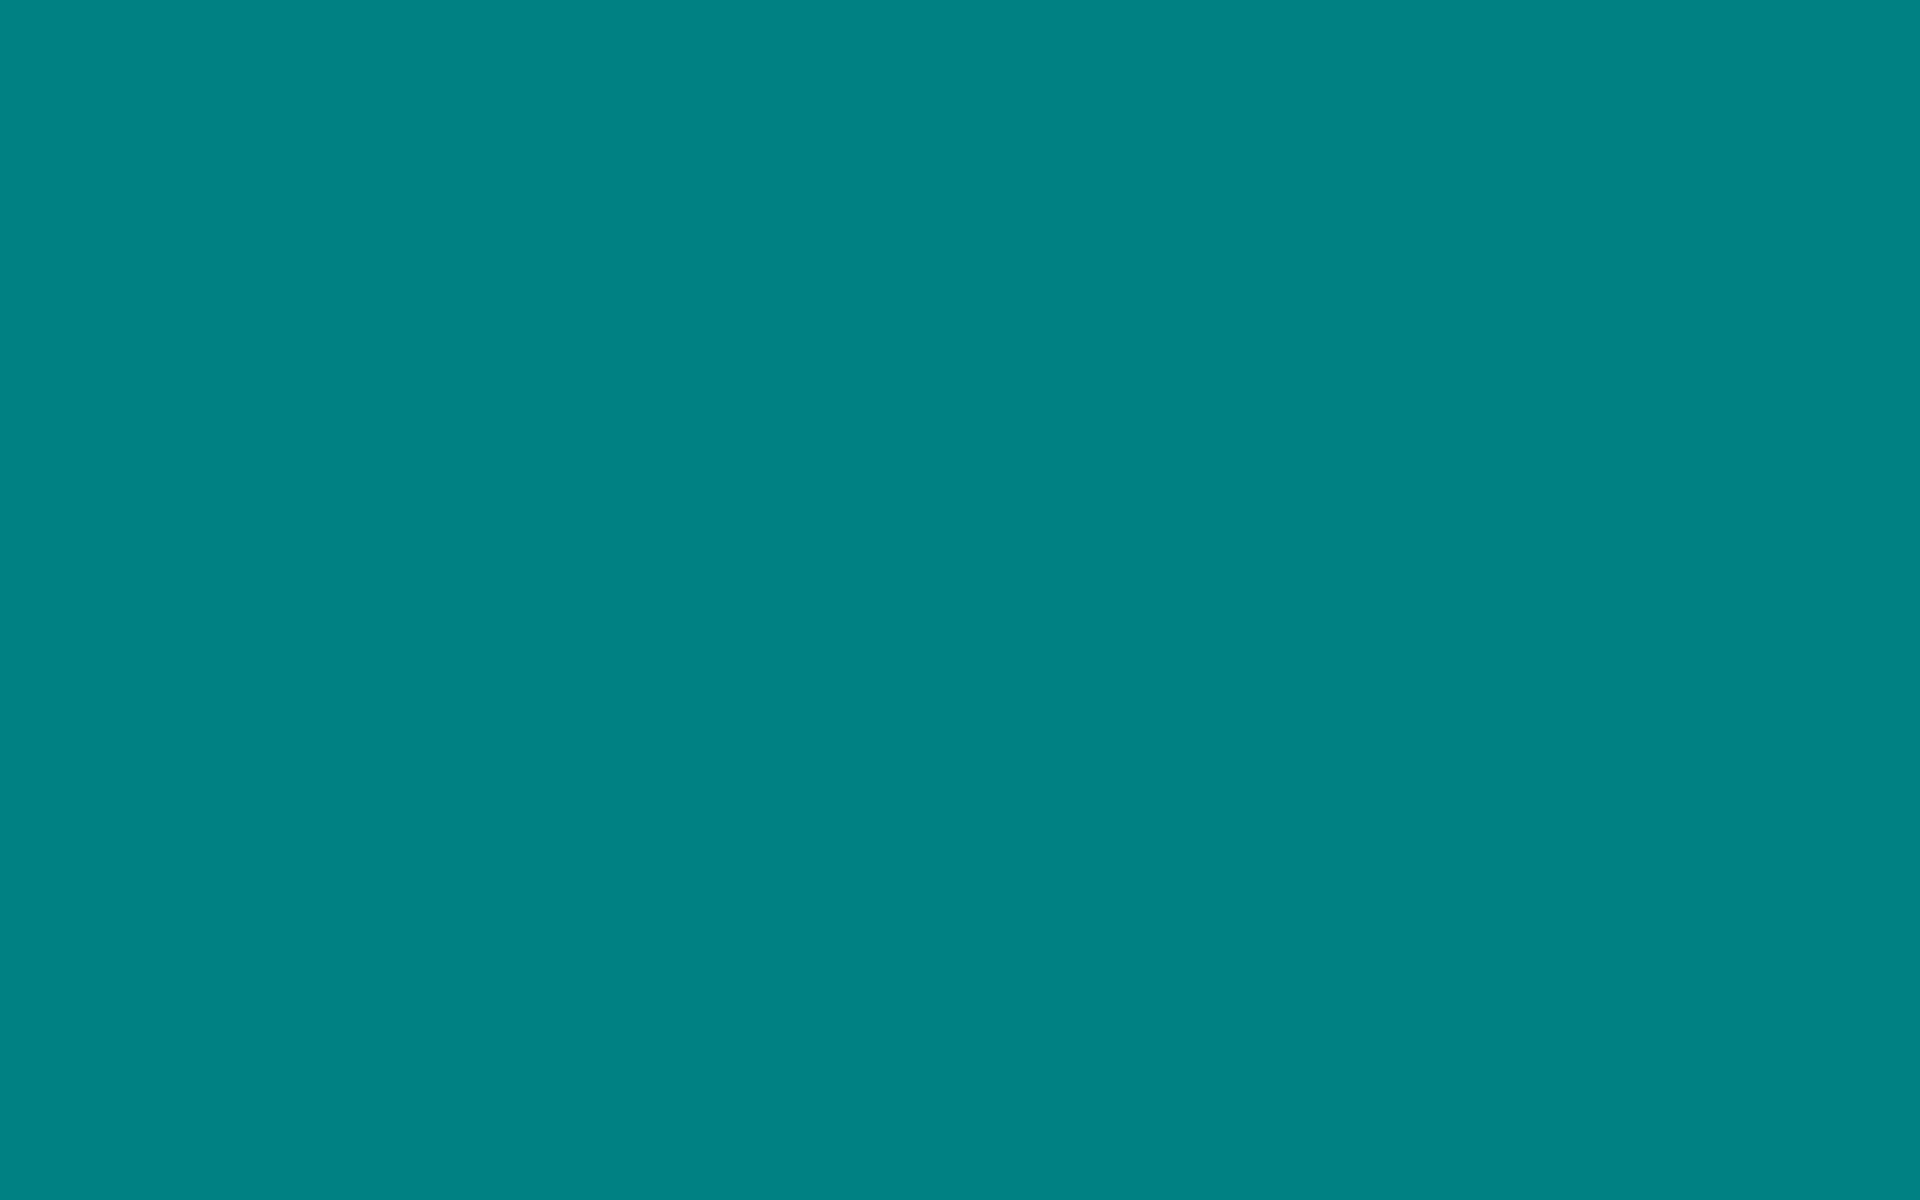 1920x1200 Download the following Teal Solid Color Wallpaper 2111 by clicking the  button positioned underneath the "